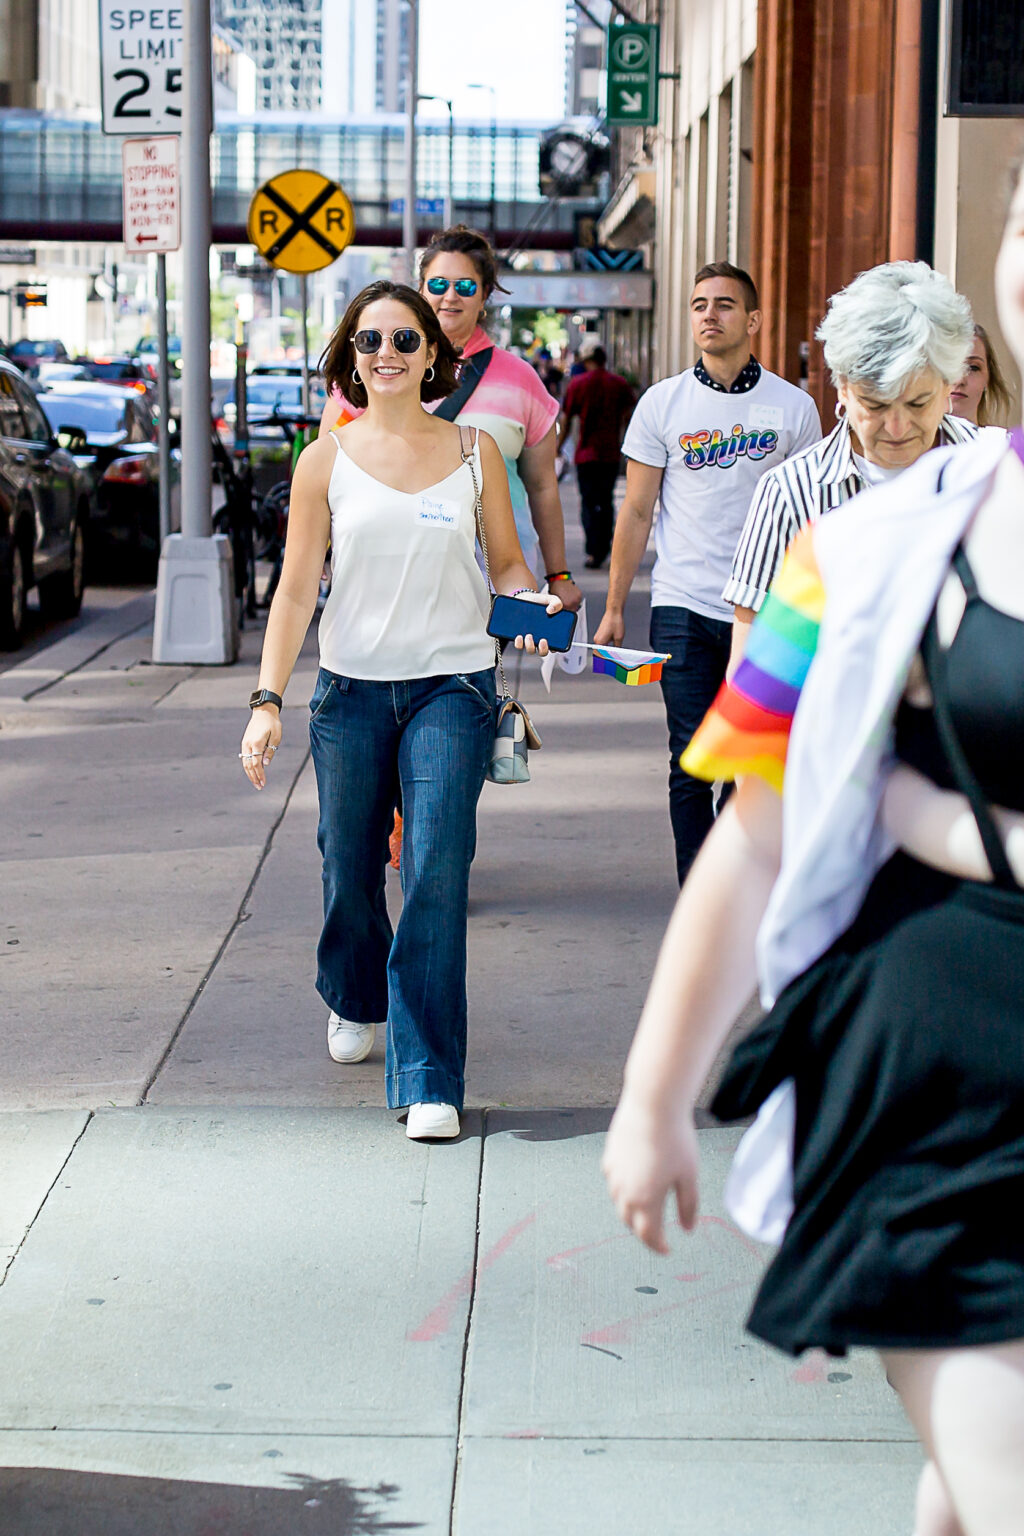 Men and women walking down the street in downtown Minneapolis weating Turnberry Pride attire